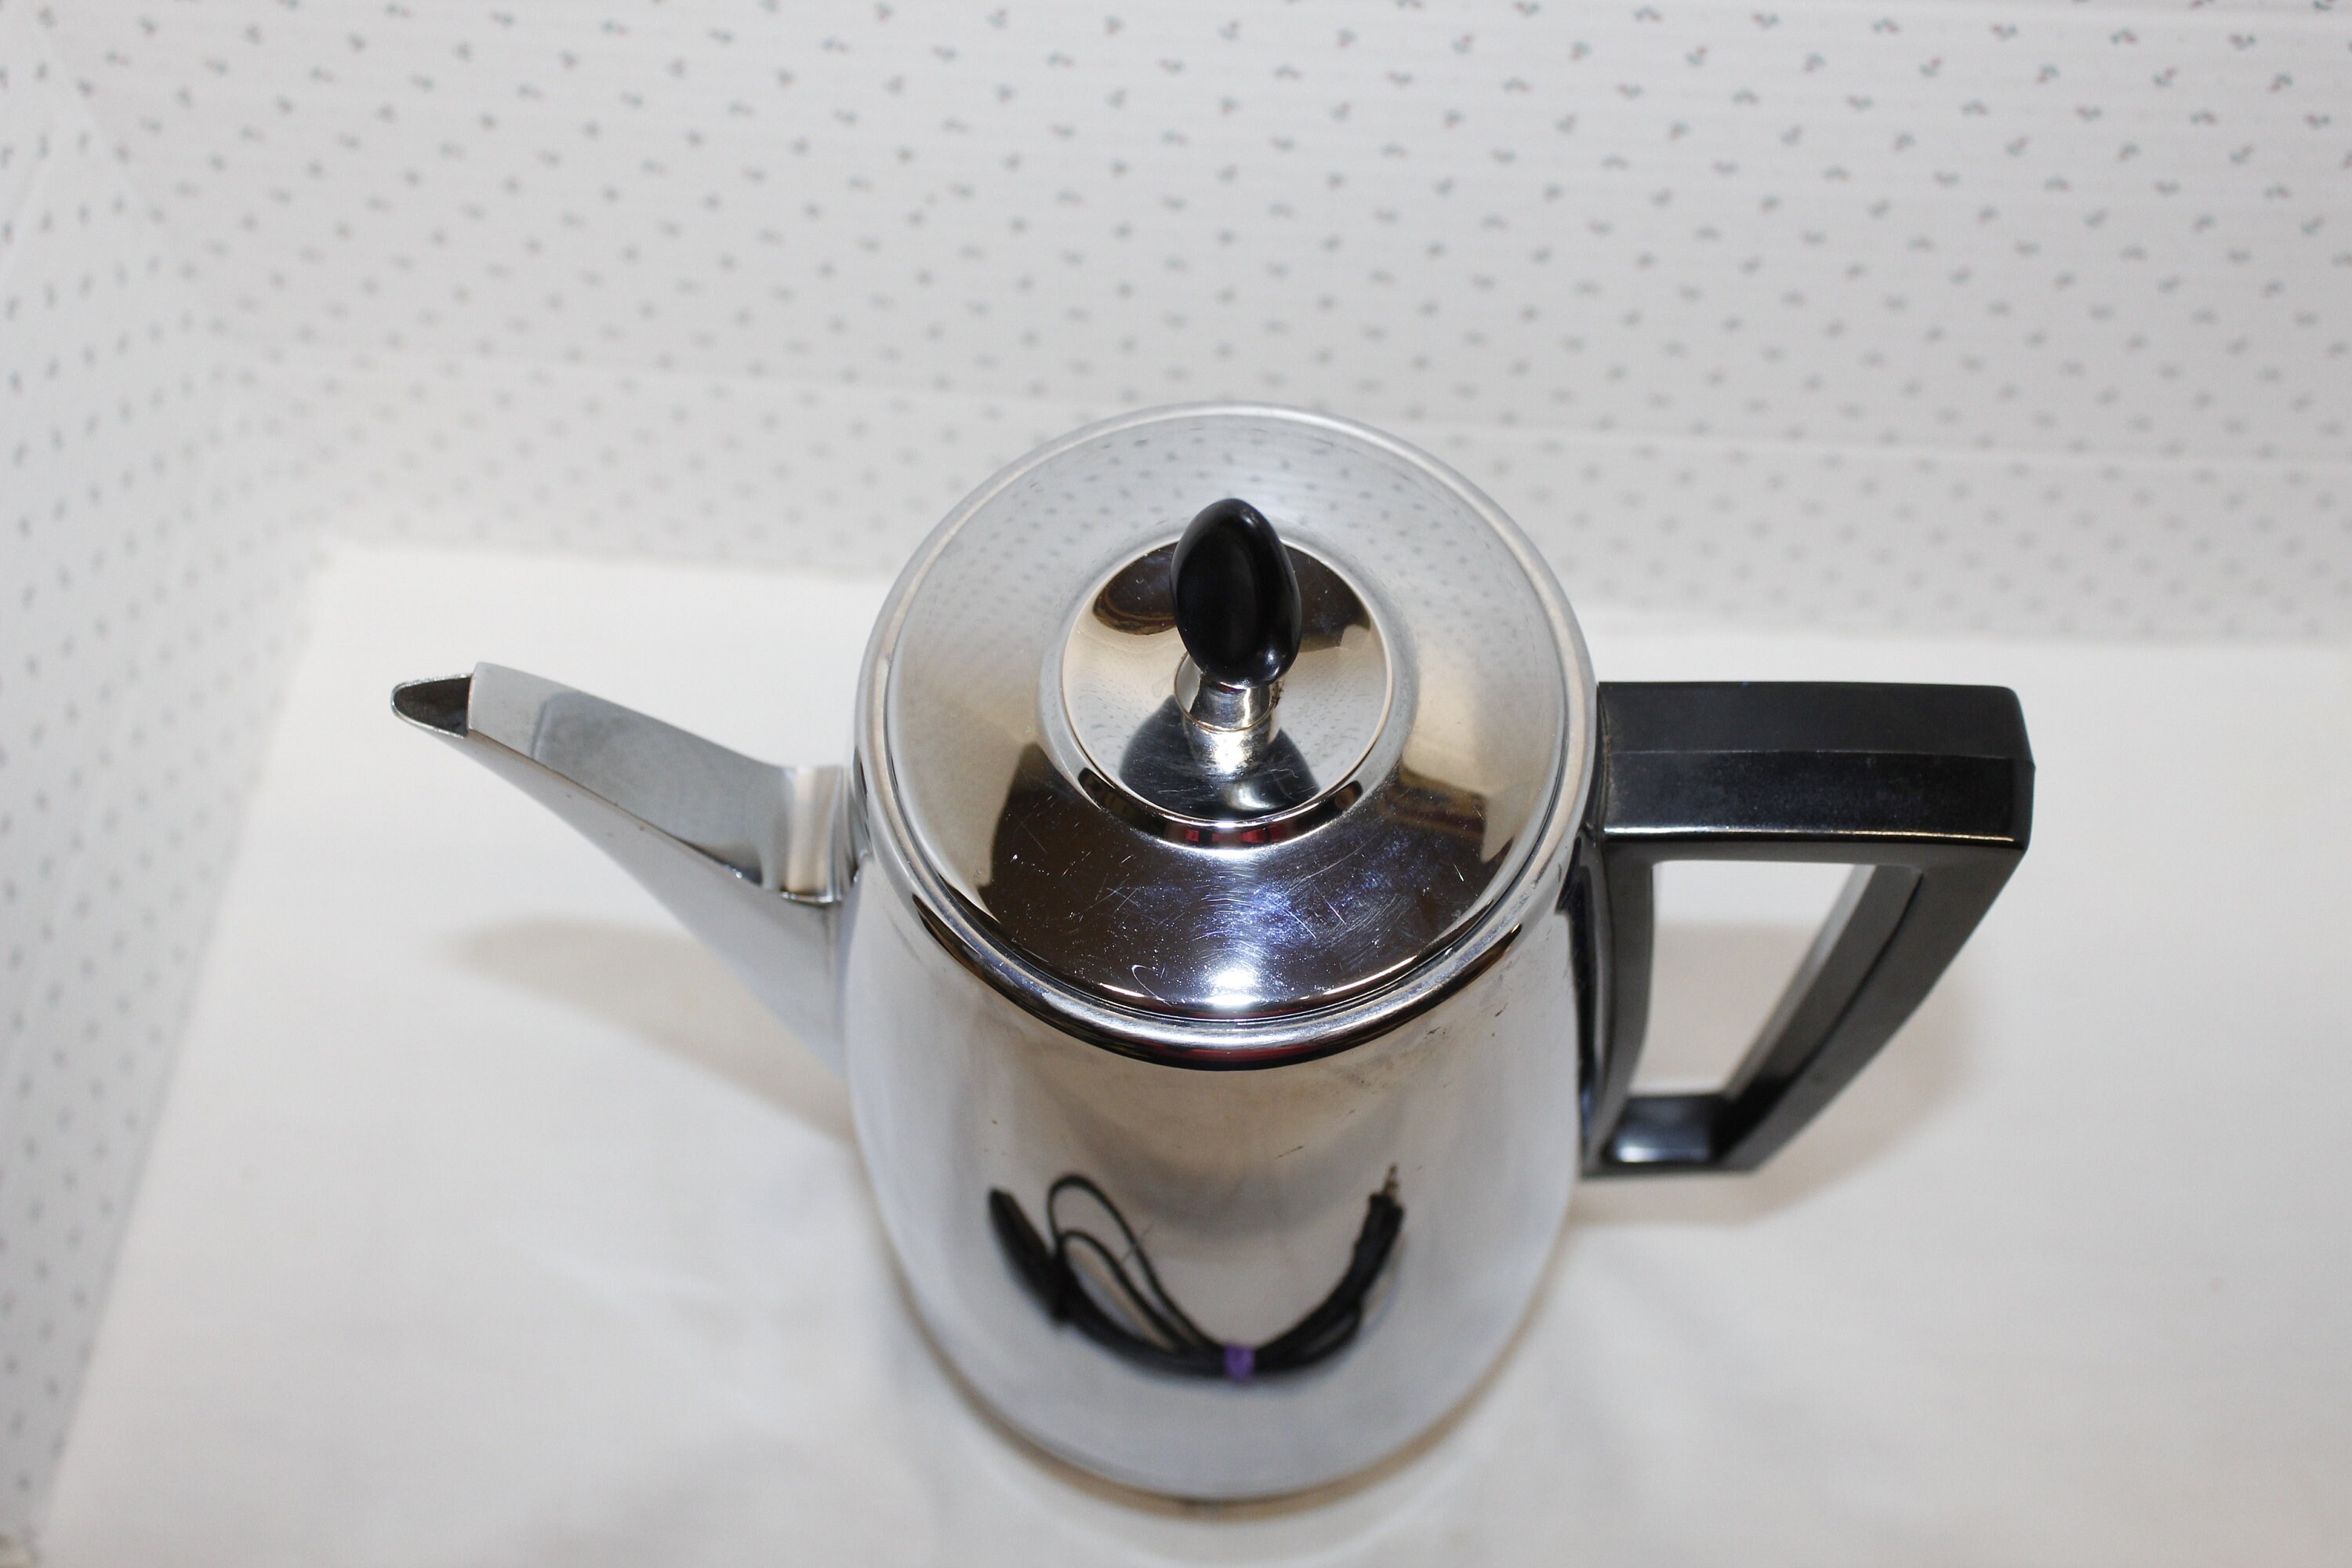 Vintage Presto Electric Percolator Coffee Pot Stainless 9 Cup PK10A